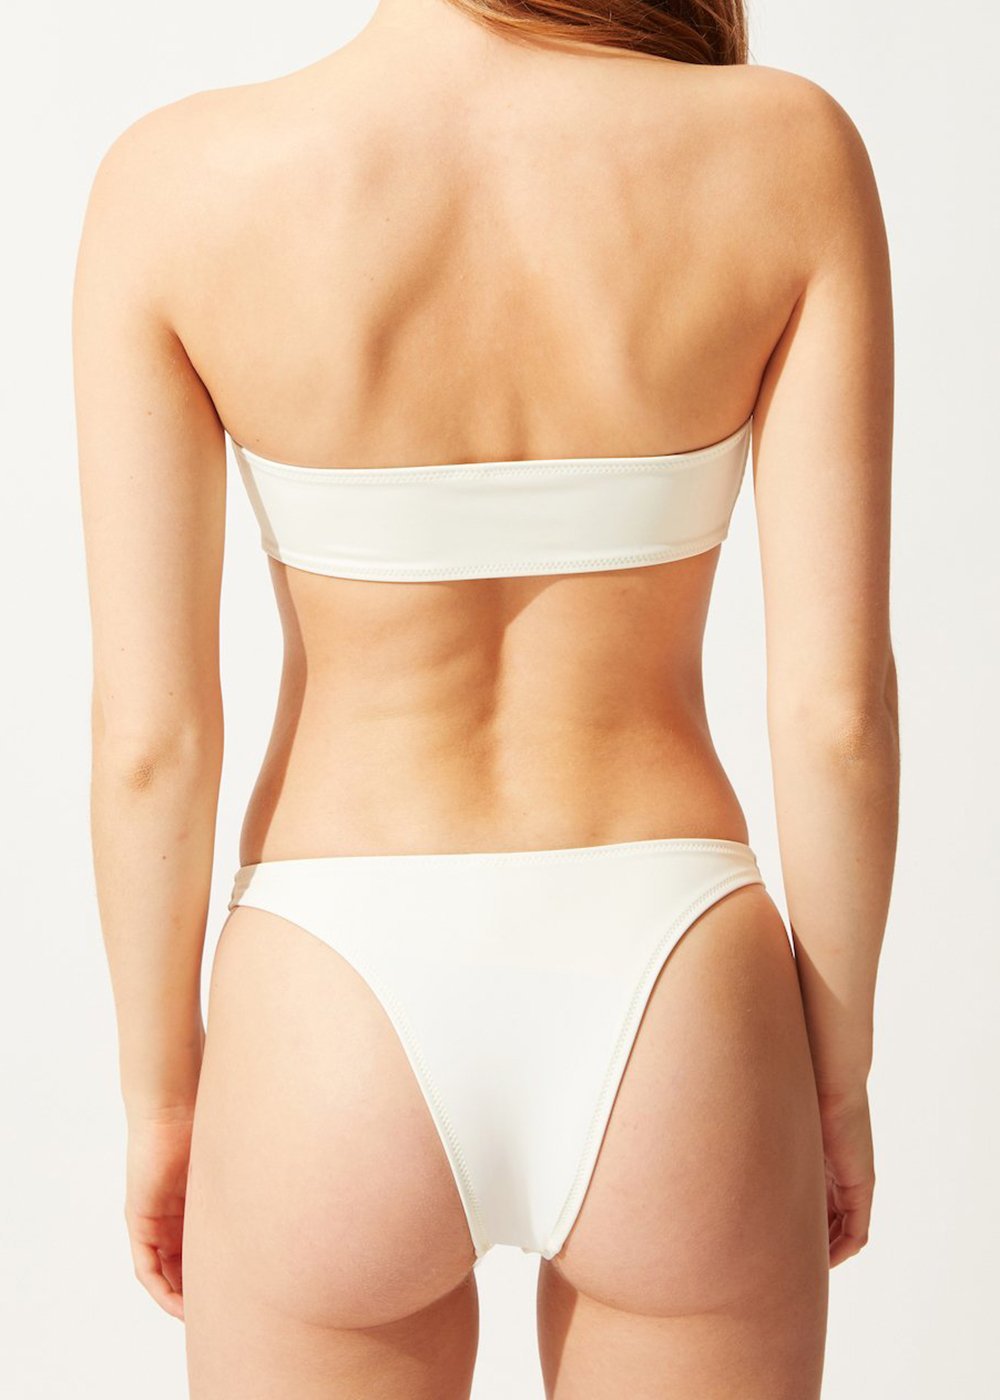 The Annabelle Bottom - Solid & Striped